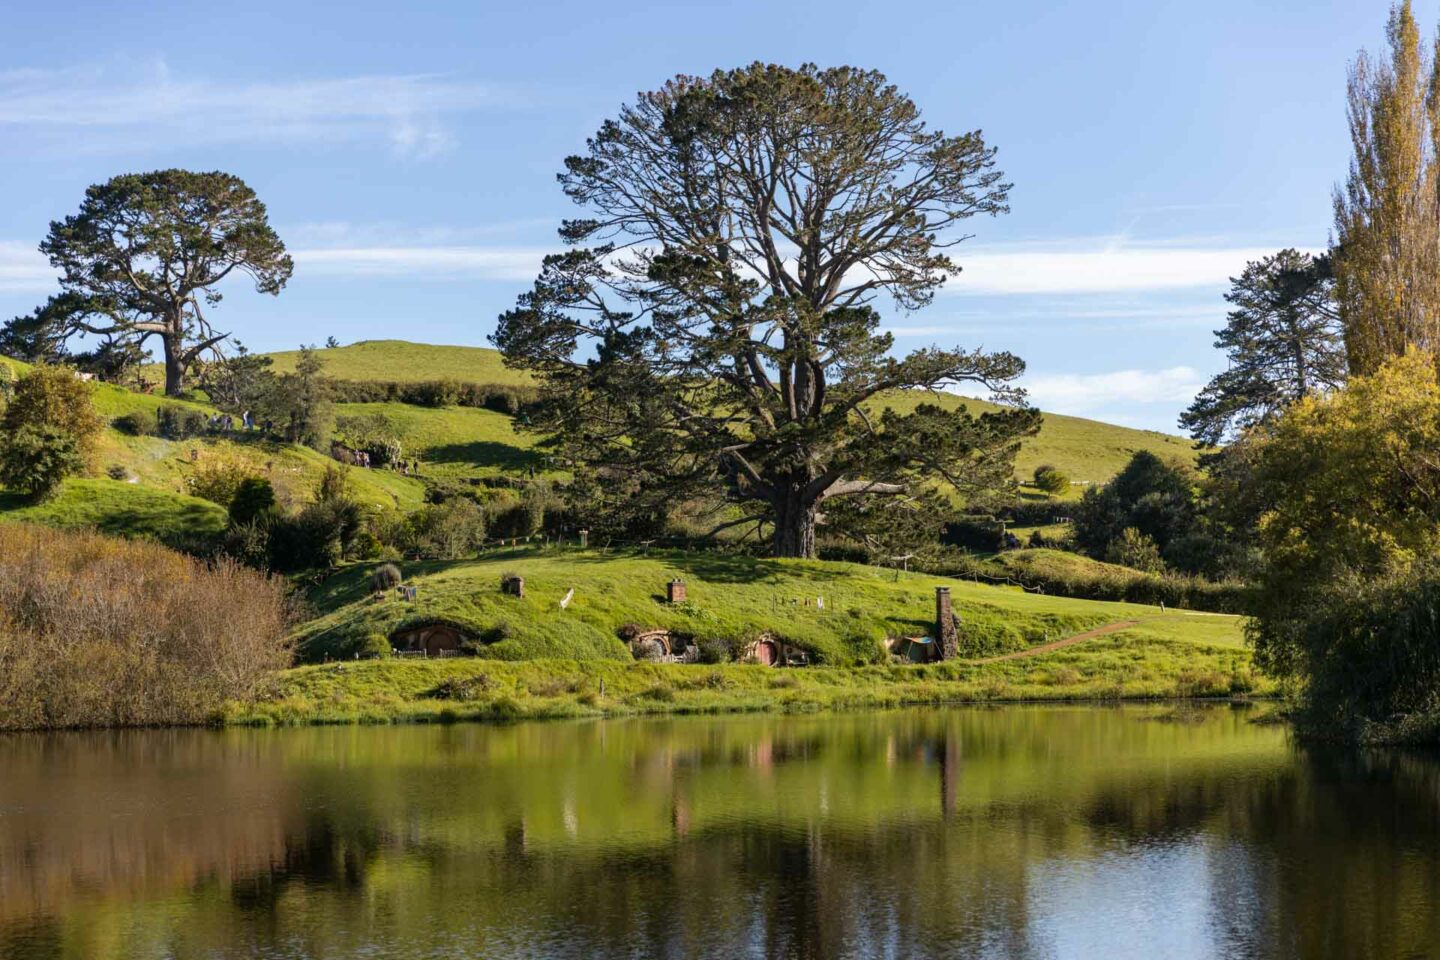 tours from auckland to hobbiton, hobbiton tours from auckland